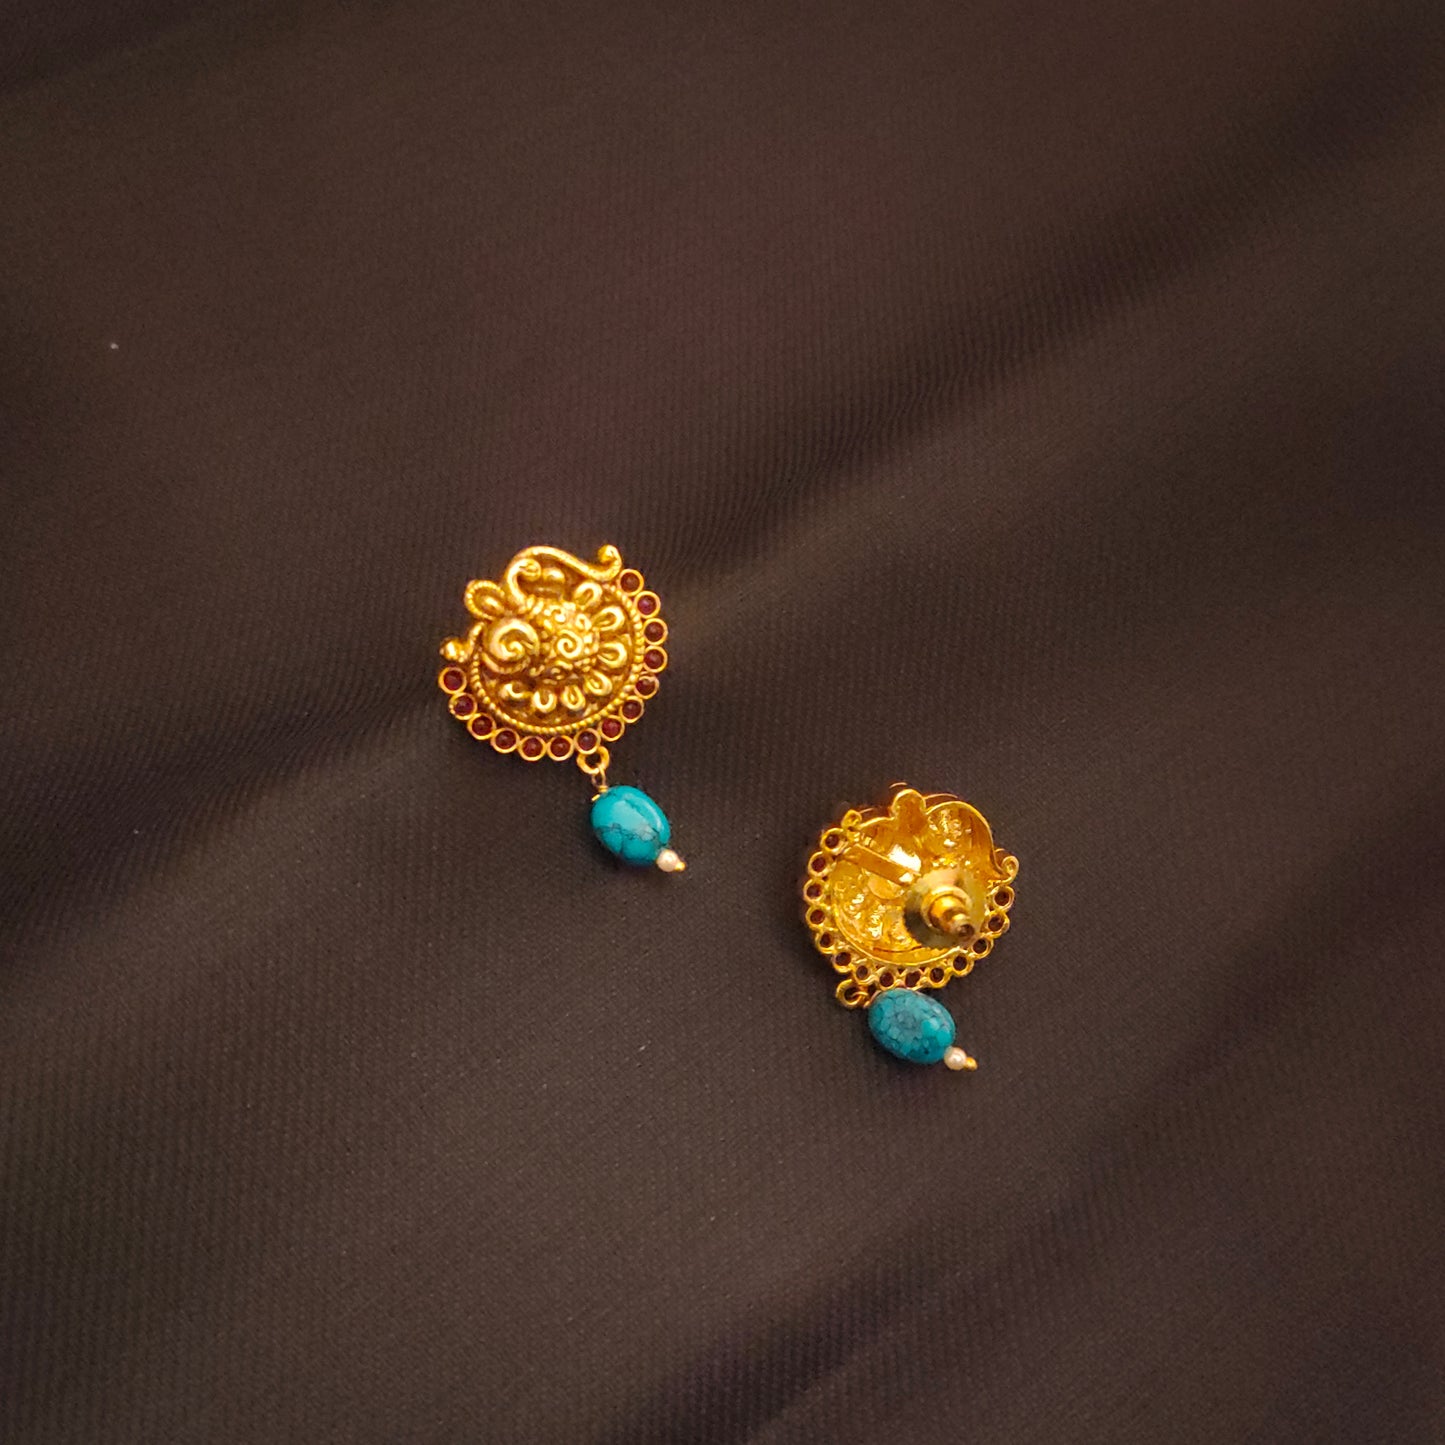 "Timeless Elegance: Antique Nagas Studs Earrings by ASP Fashion Jewellery"